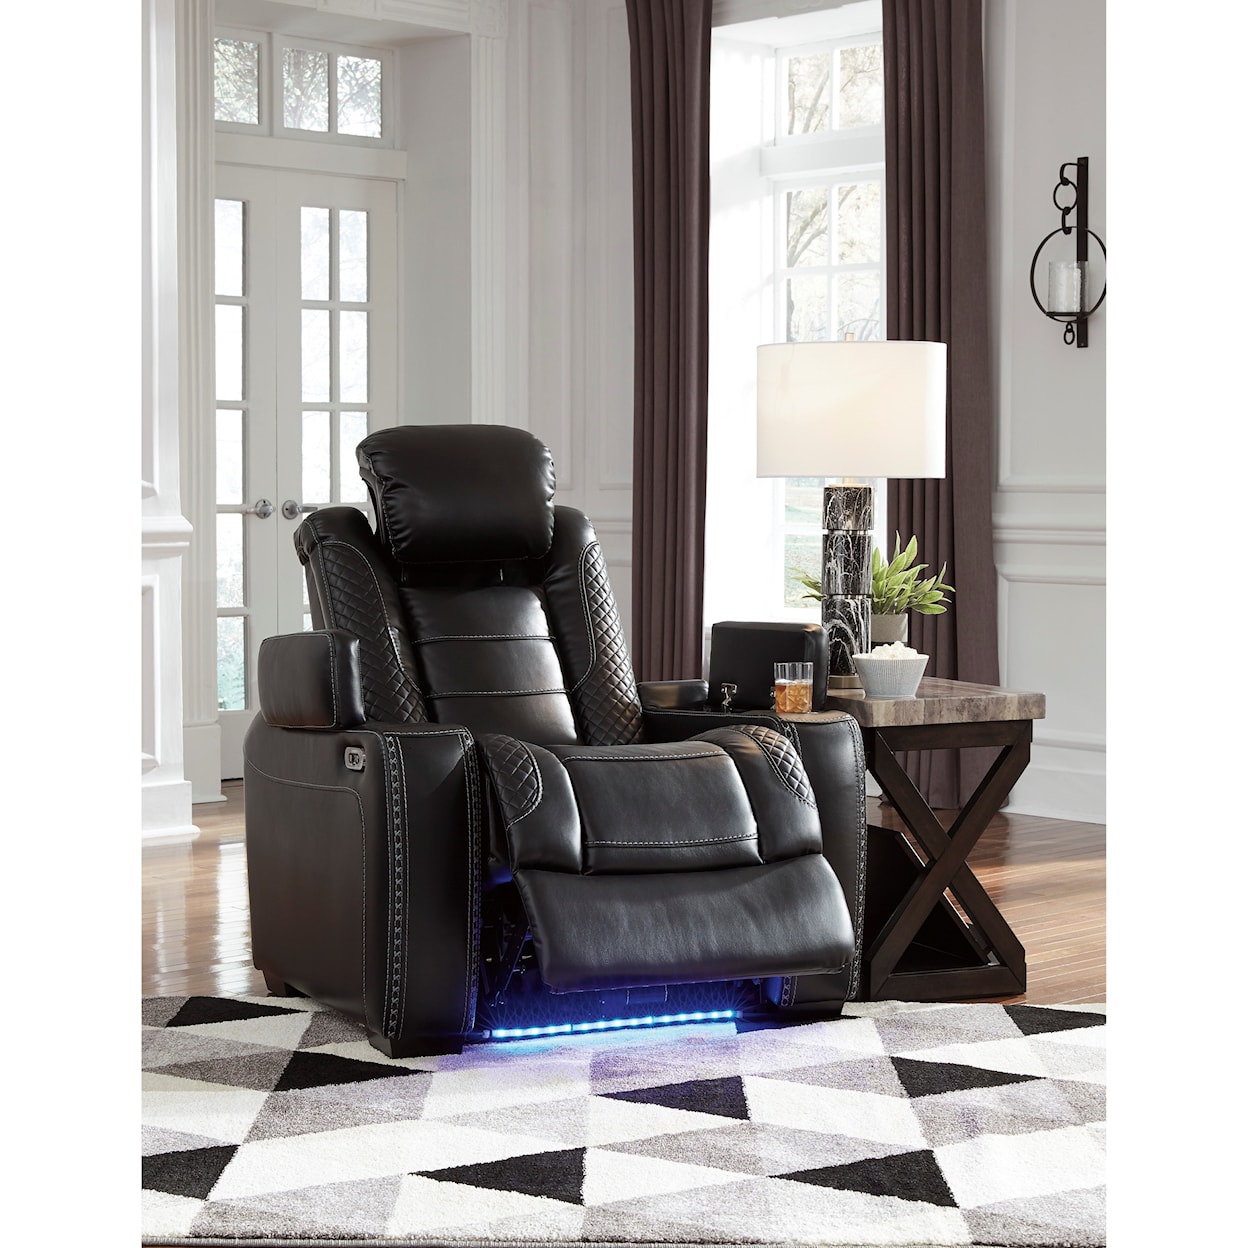 Signature Design Party Time Power Recliner with Adjustable Headrest